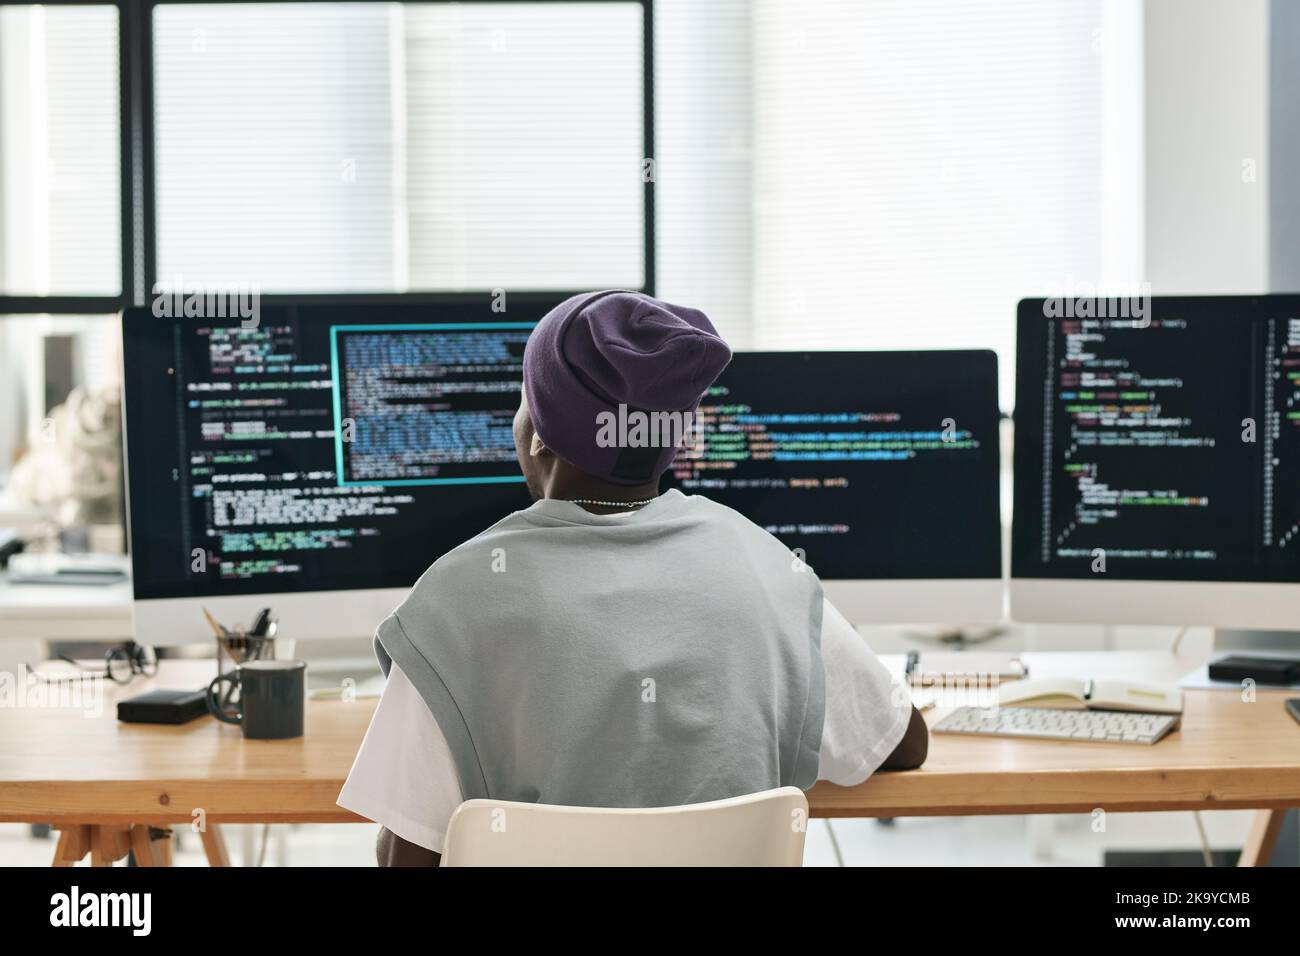 Back view of young software developer sitting by workplace in front of three computer monitors with coded data on screens Stock Photo